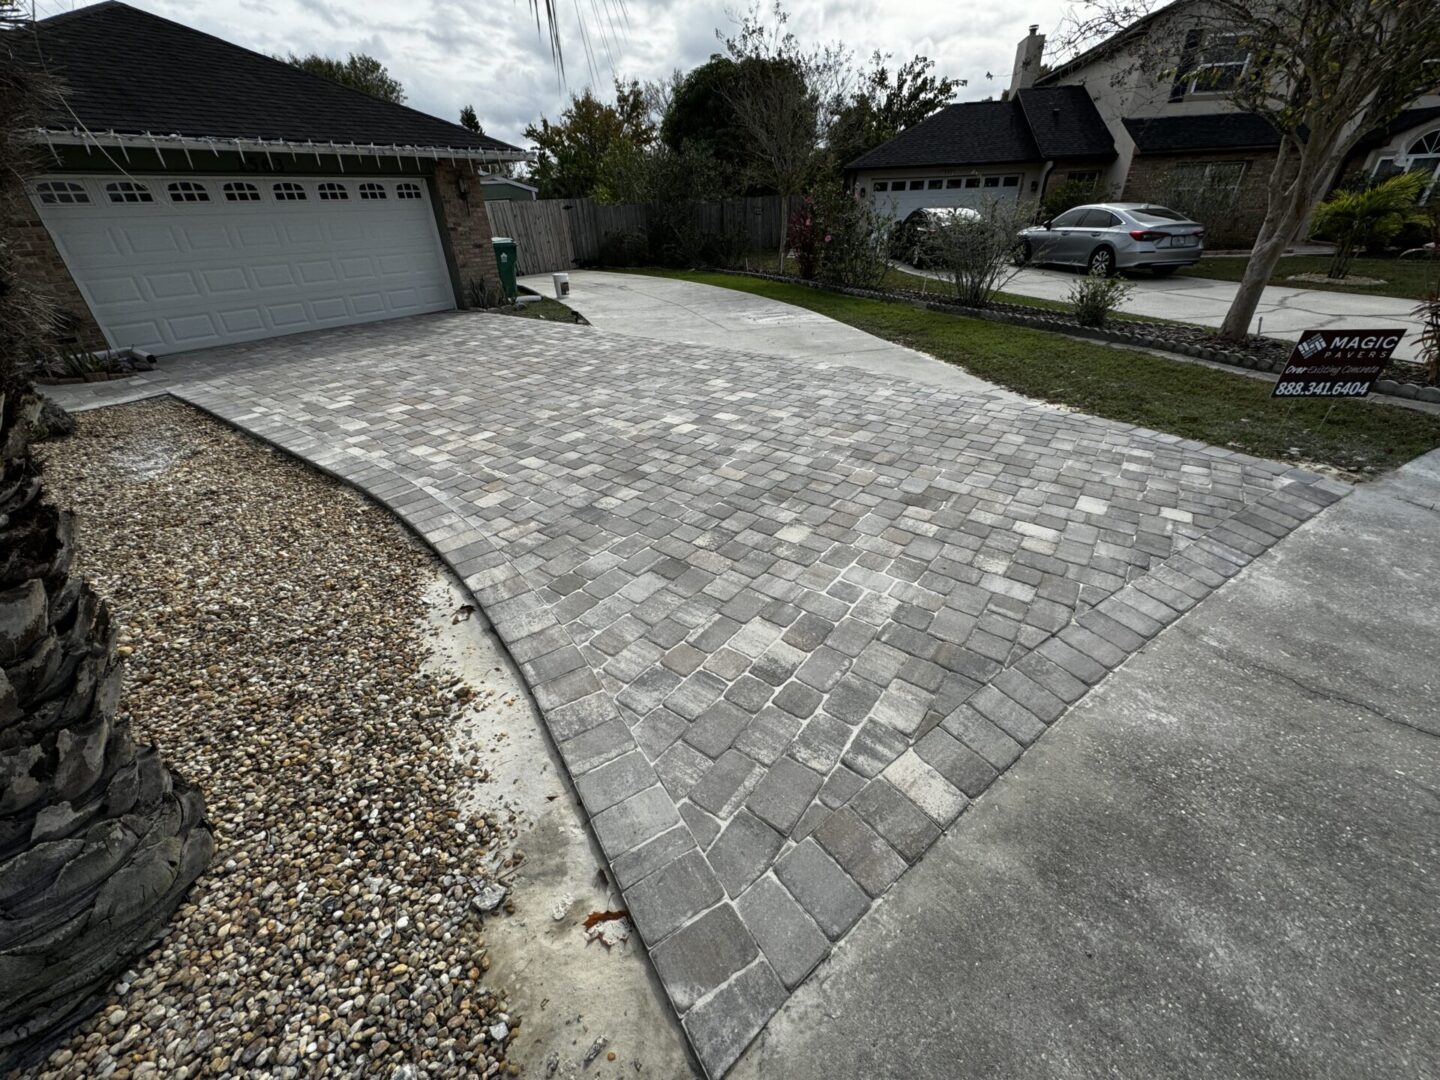 A freshly laid brick driveway leads to a two-car garage. The driveway is bordered by a stone-covered area and a concrete section. A house with a car parked in front is visible in the background.